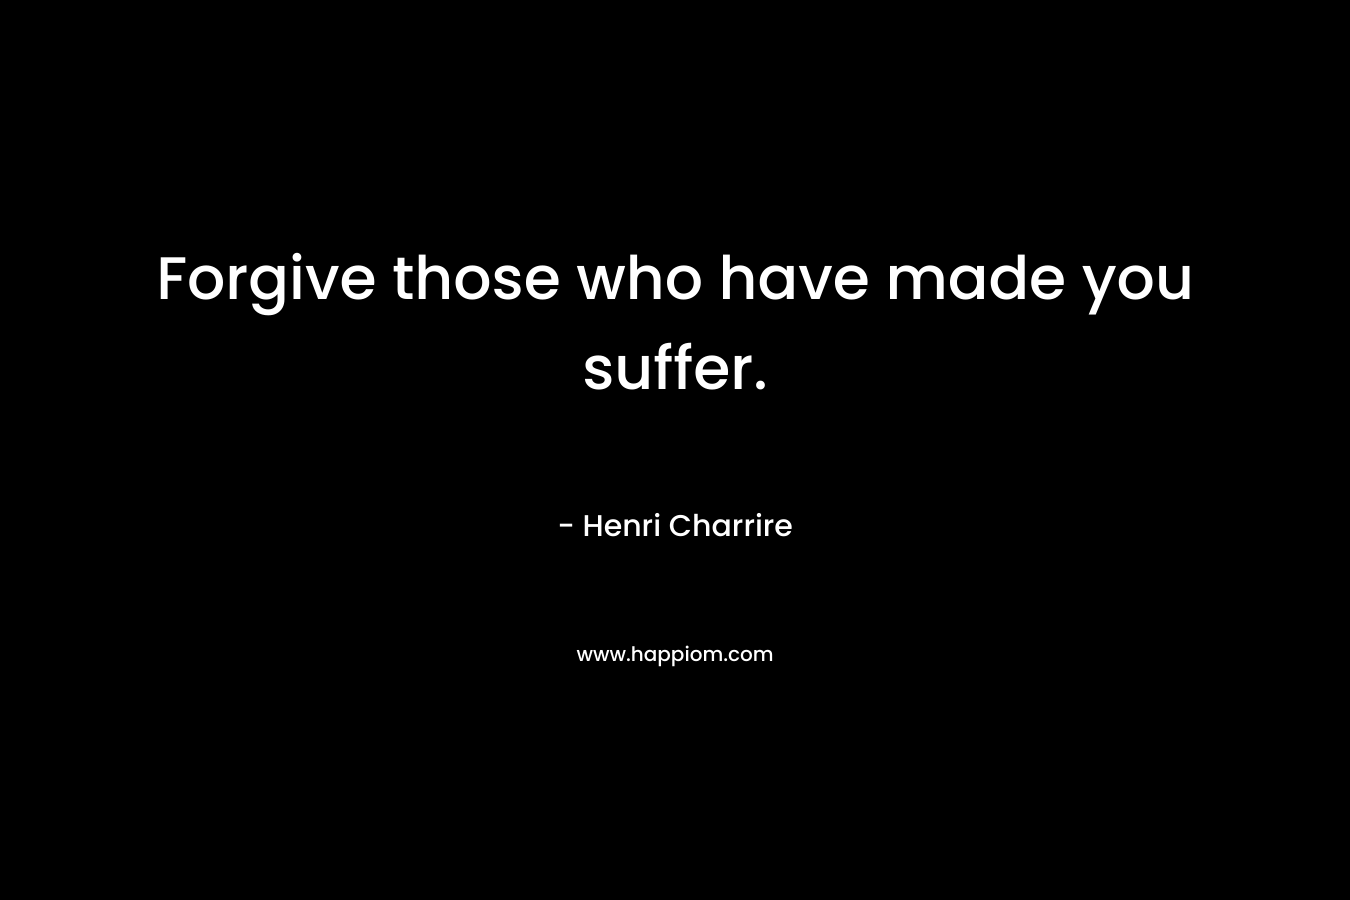 Forgive those who have made you suffer. – Henri Charrire